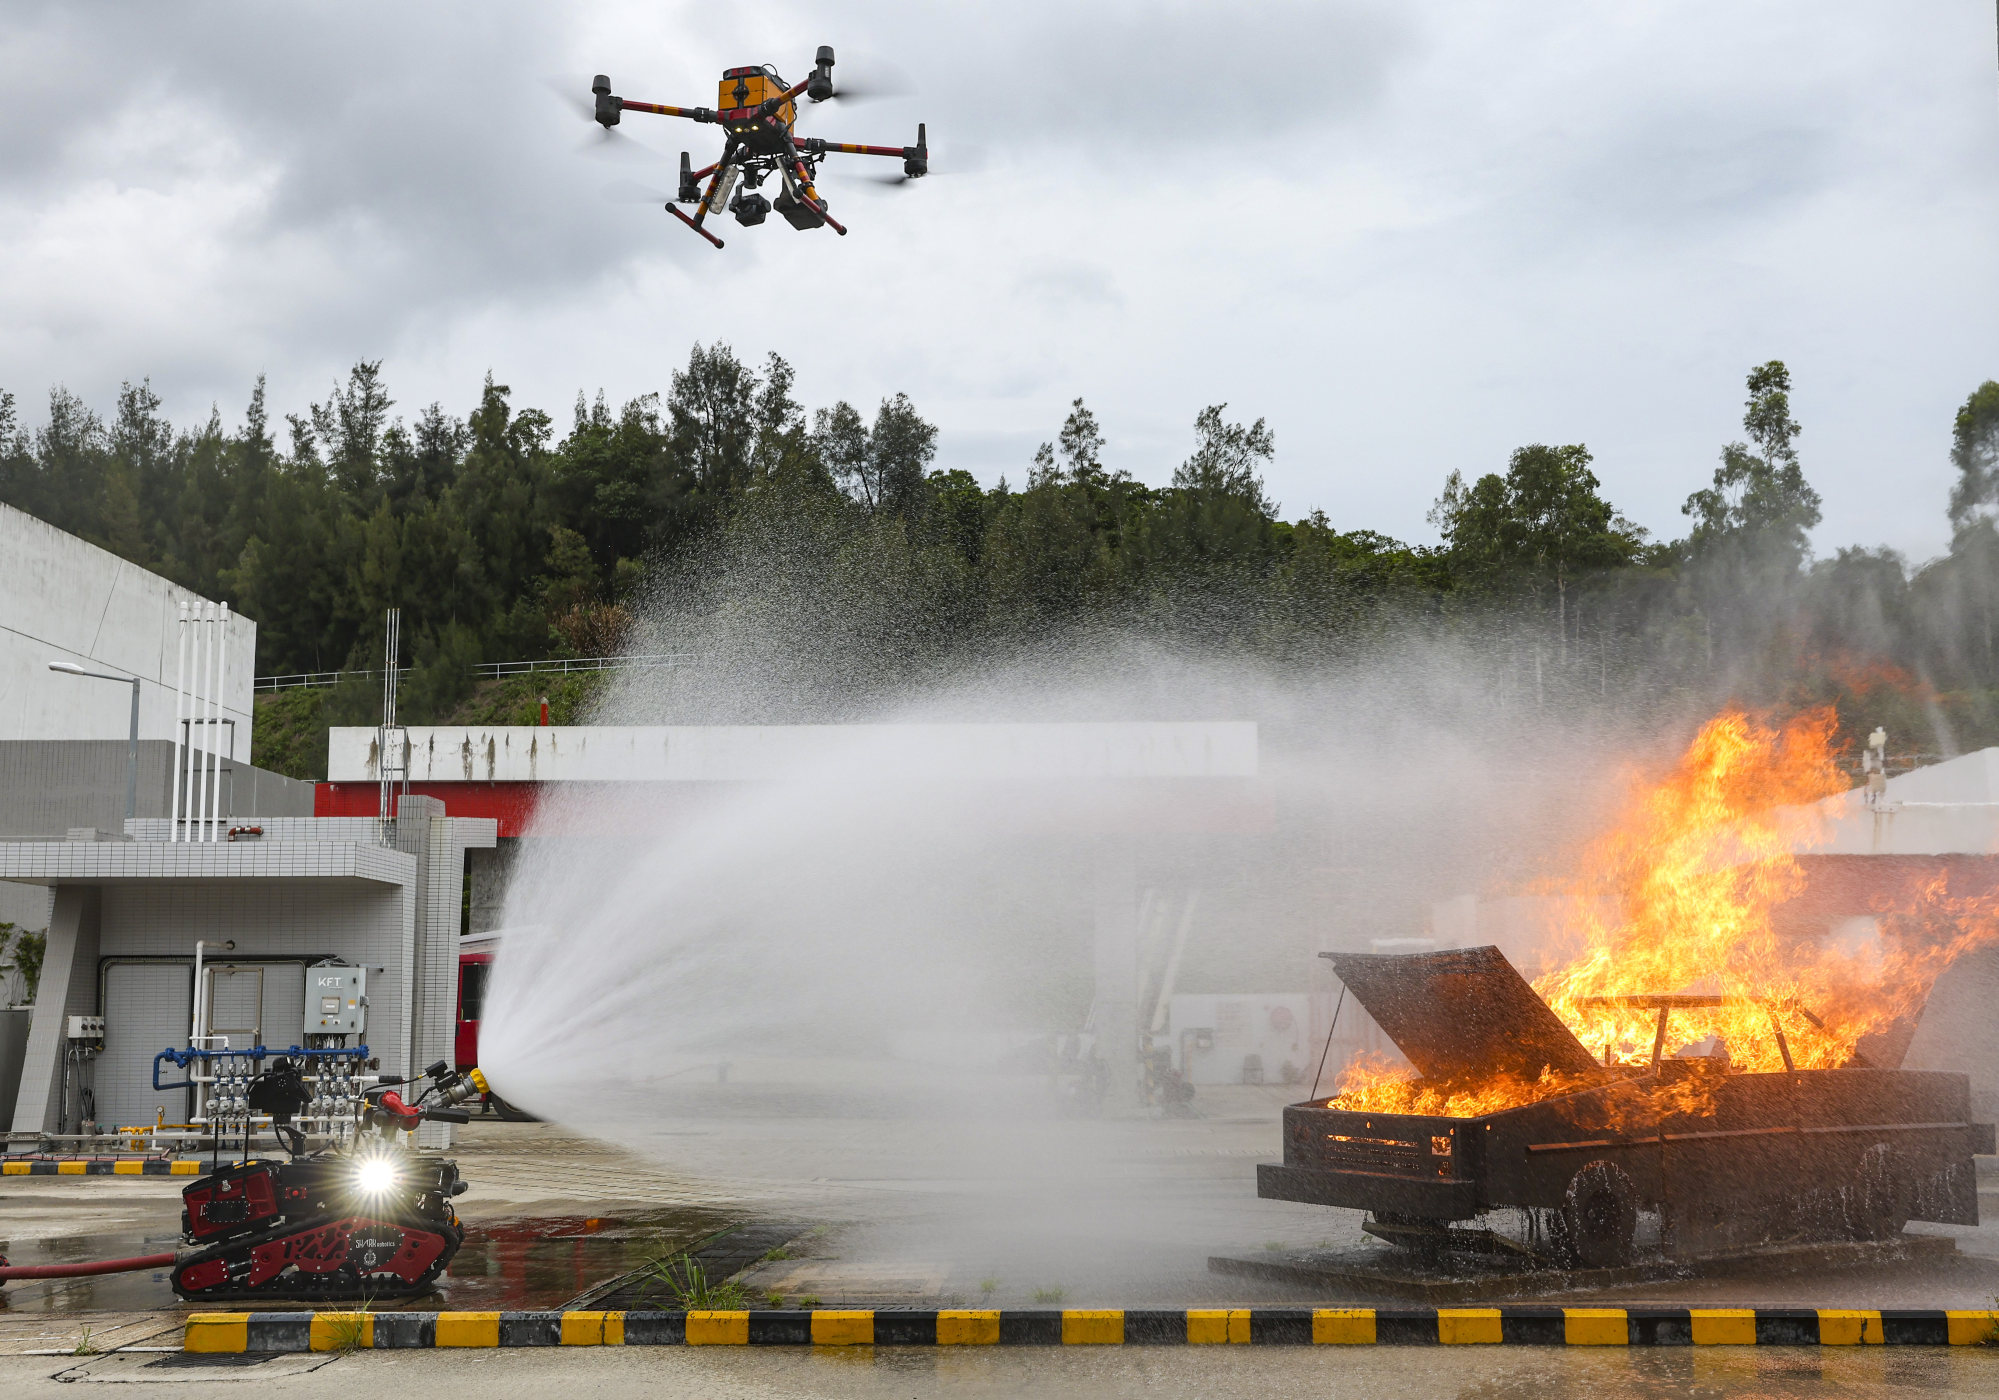 The multi-rotor small unmanned aircraft and firefighting robot during a training exercise at the Fire and Ambulance Services Academy in Tseung Kwan O. Photo: Edmond So